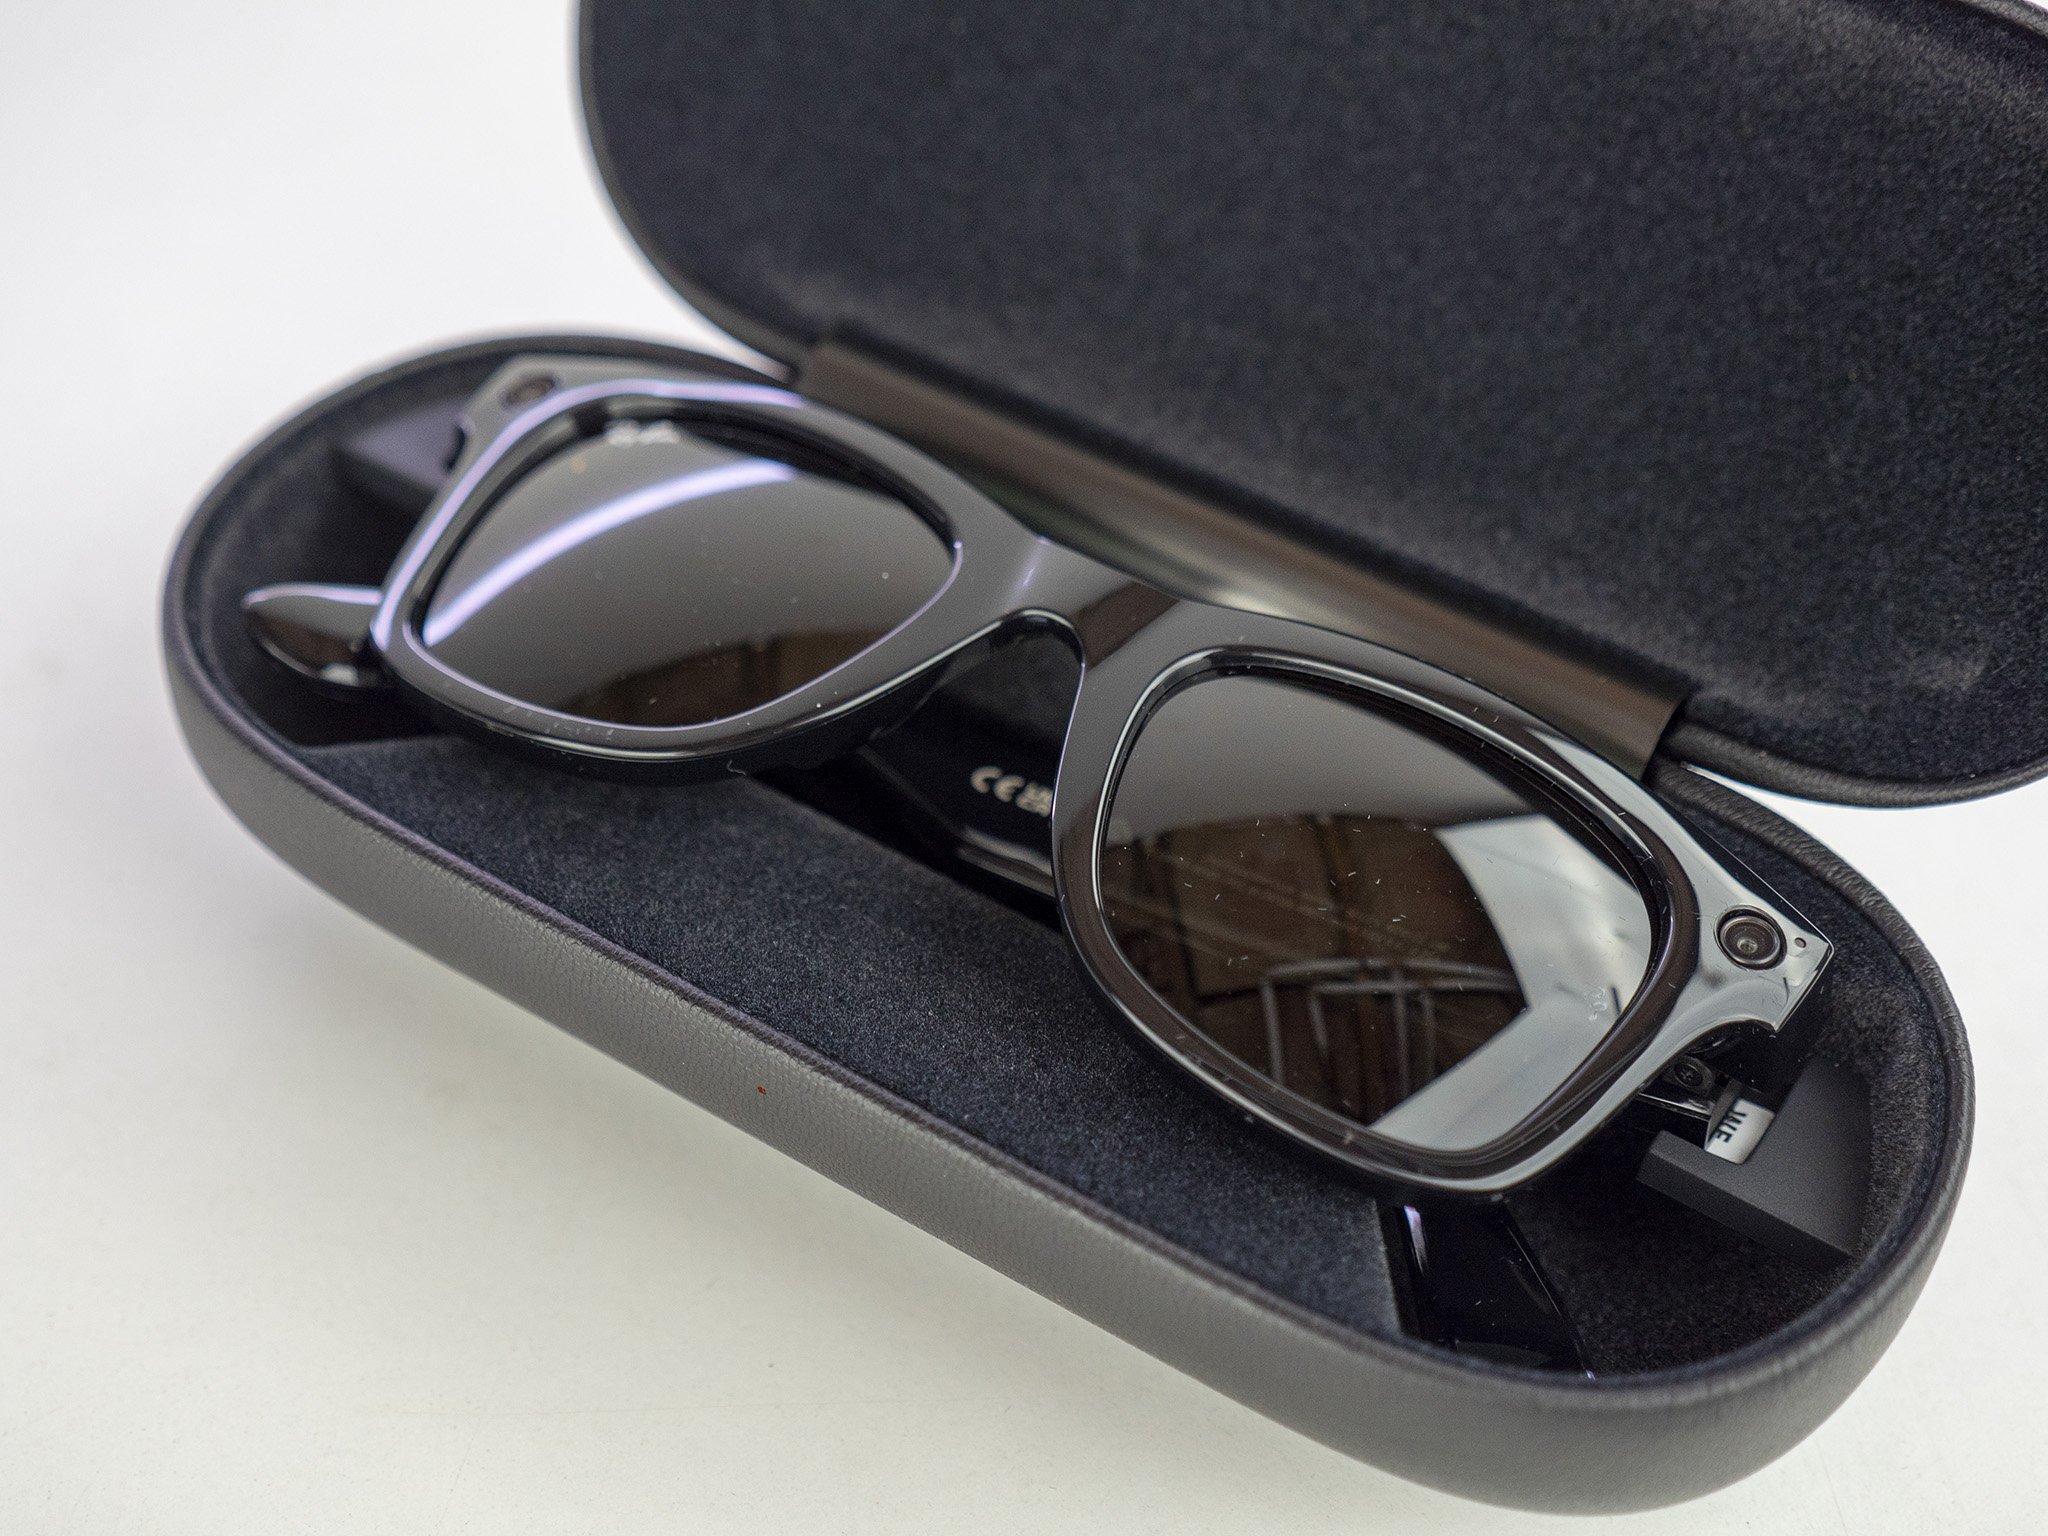 Ray Ban Stories Glasses In Case